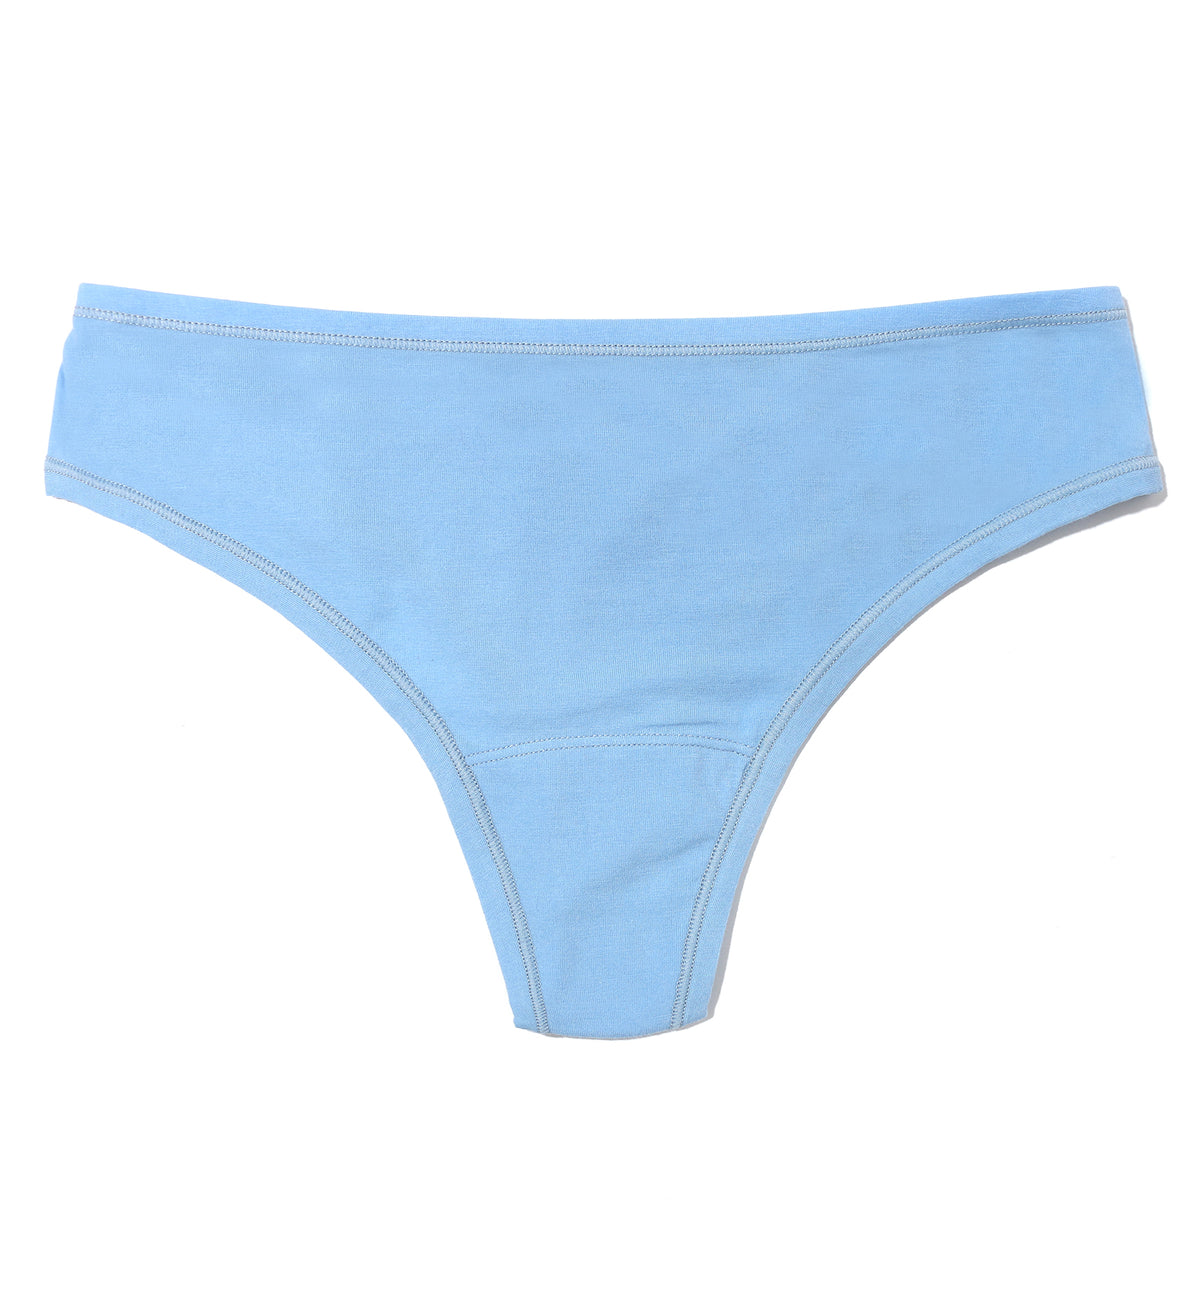 Hanky Panky Play Cotton Natural Rise Thong (721664),XS/S,Partly Cloudy - Partly Cloudy,XS/S